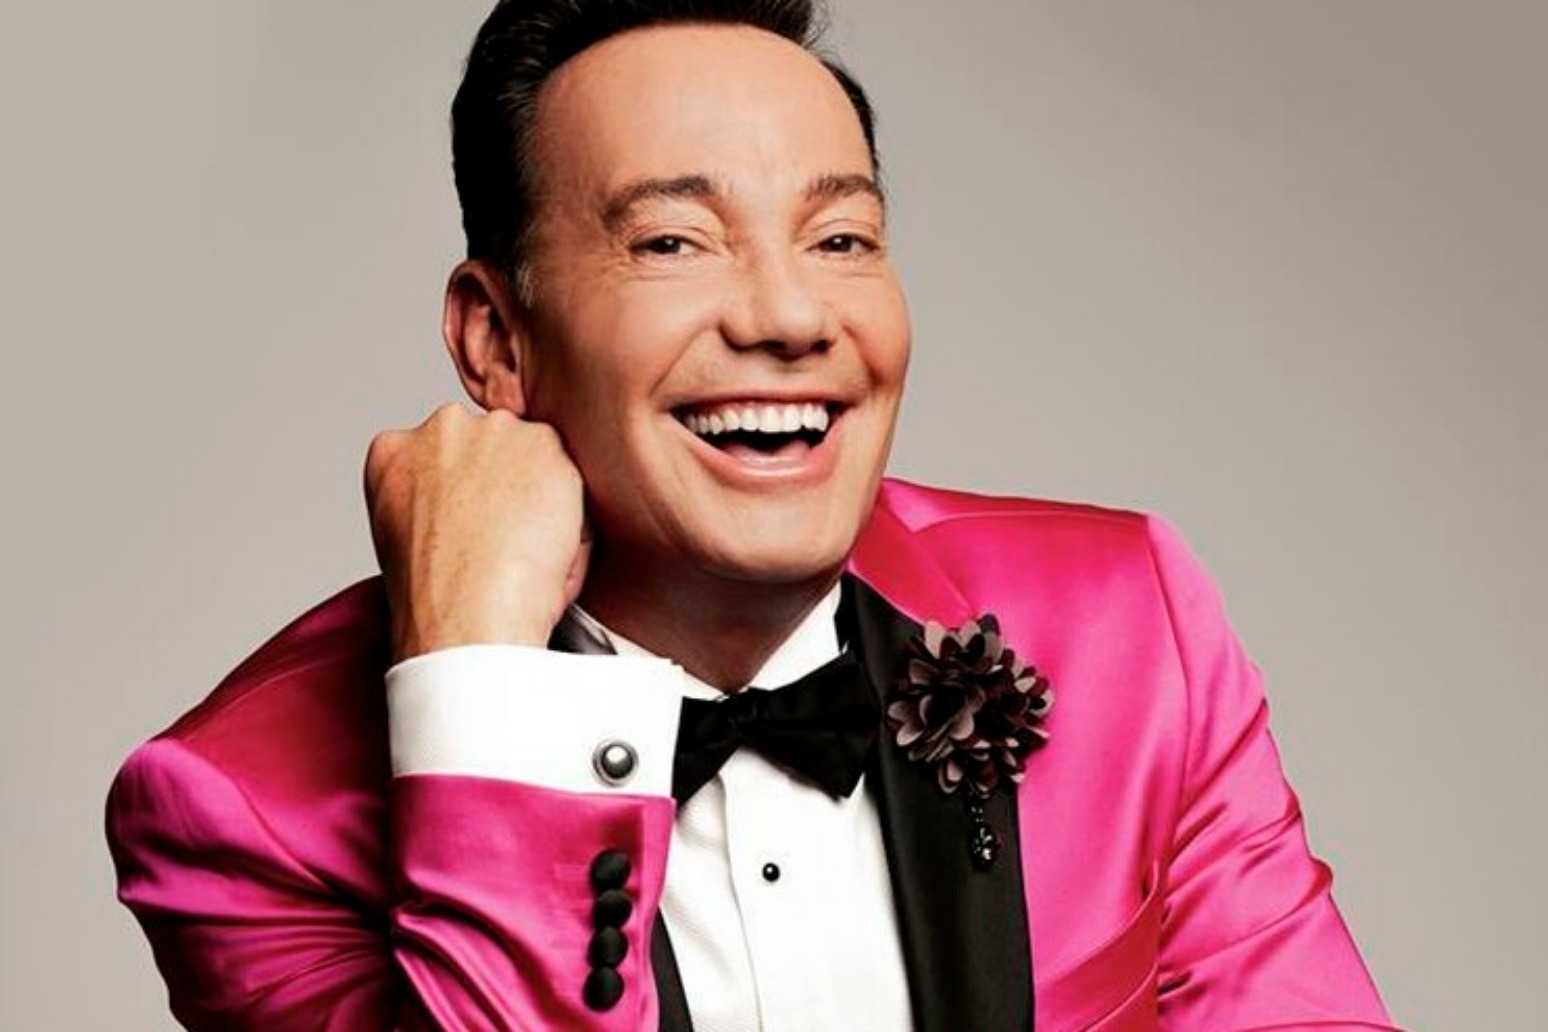 Craig Revel Horwood ‘hated’ being absent from Strictly after positive Covid test 